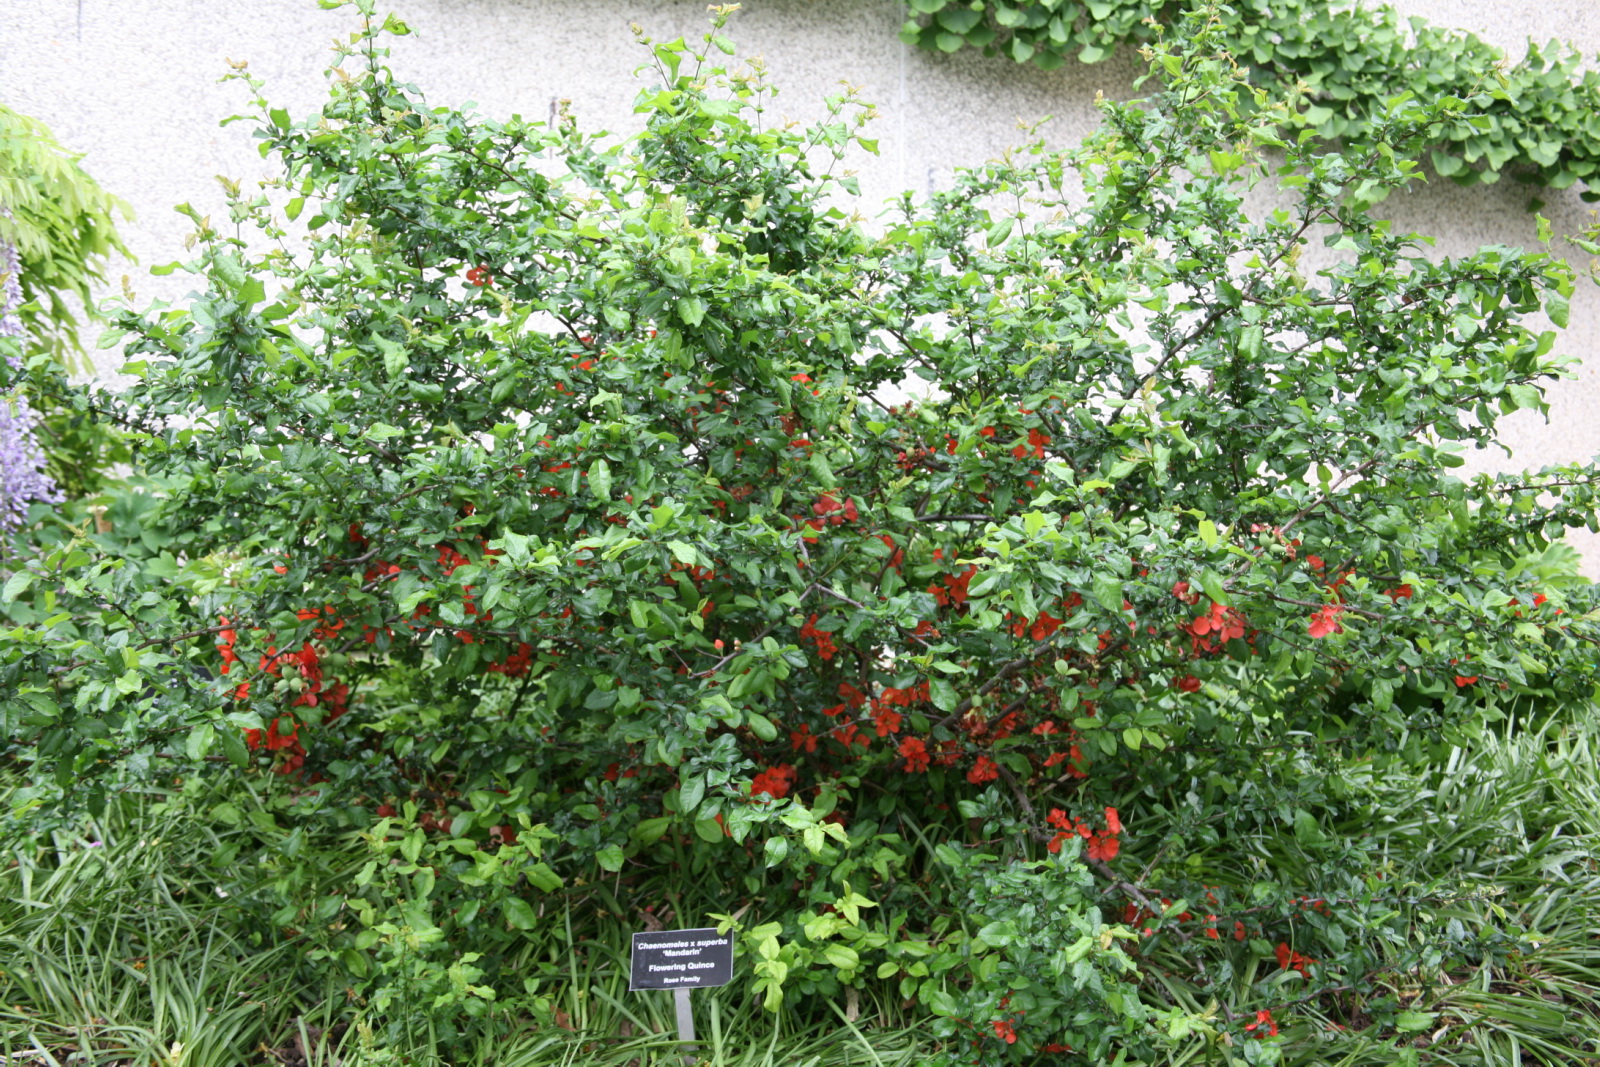 a bush with ripe berries and green leaves with a plaque for a garden marker